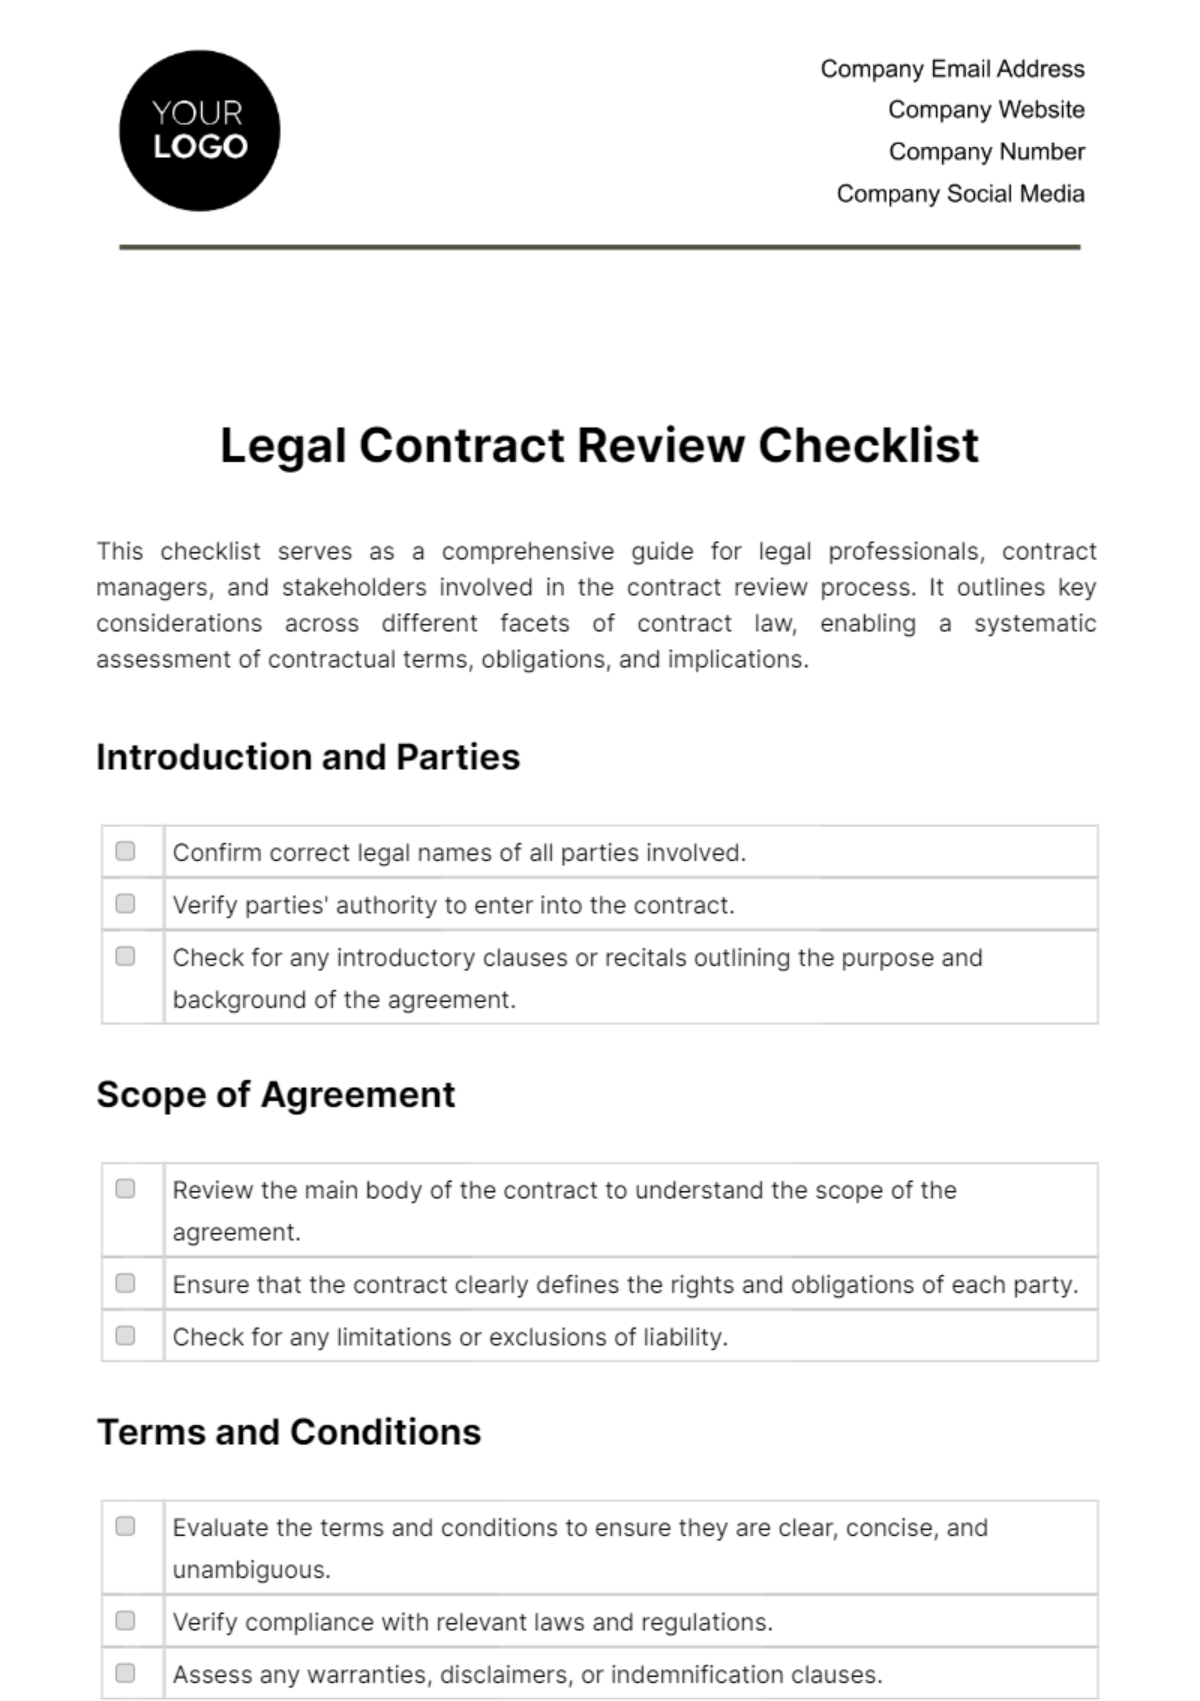 Free Legal Contract Review Checklist Template